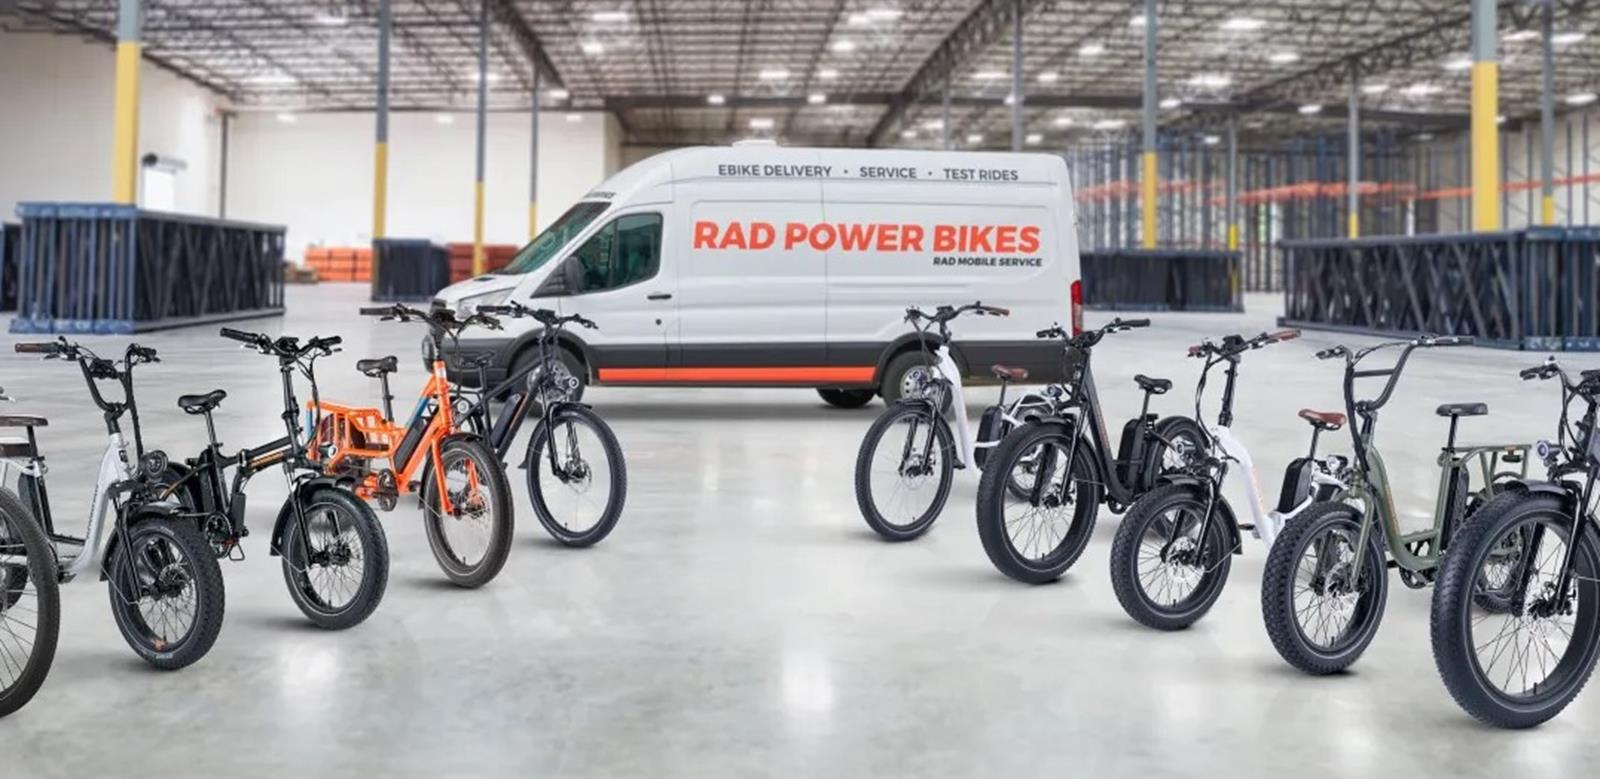 Rad Power Bikes Electricity Price Increase.  eBike will become much more expensive?